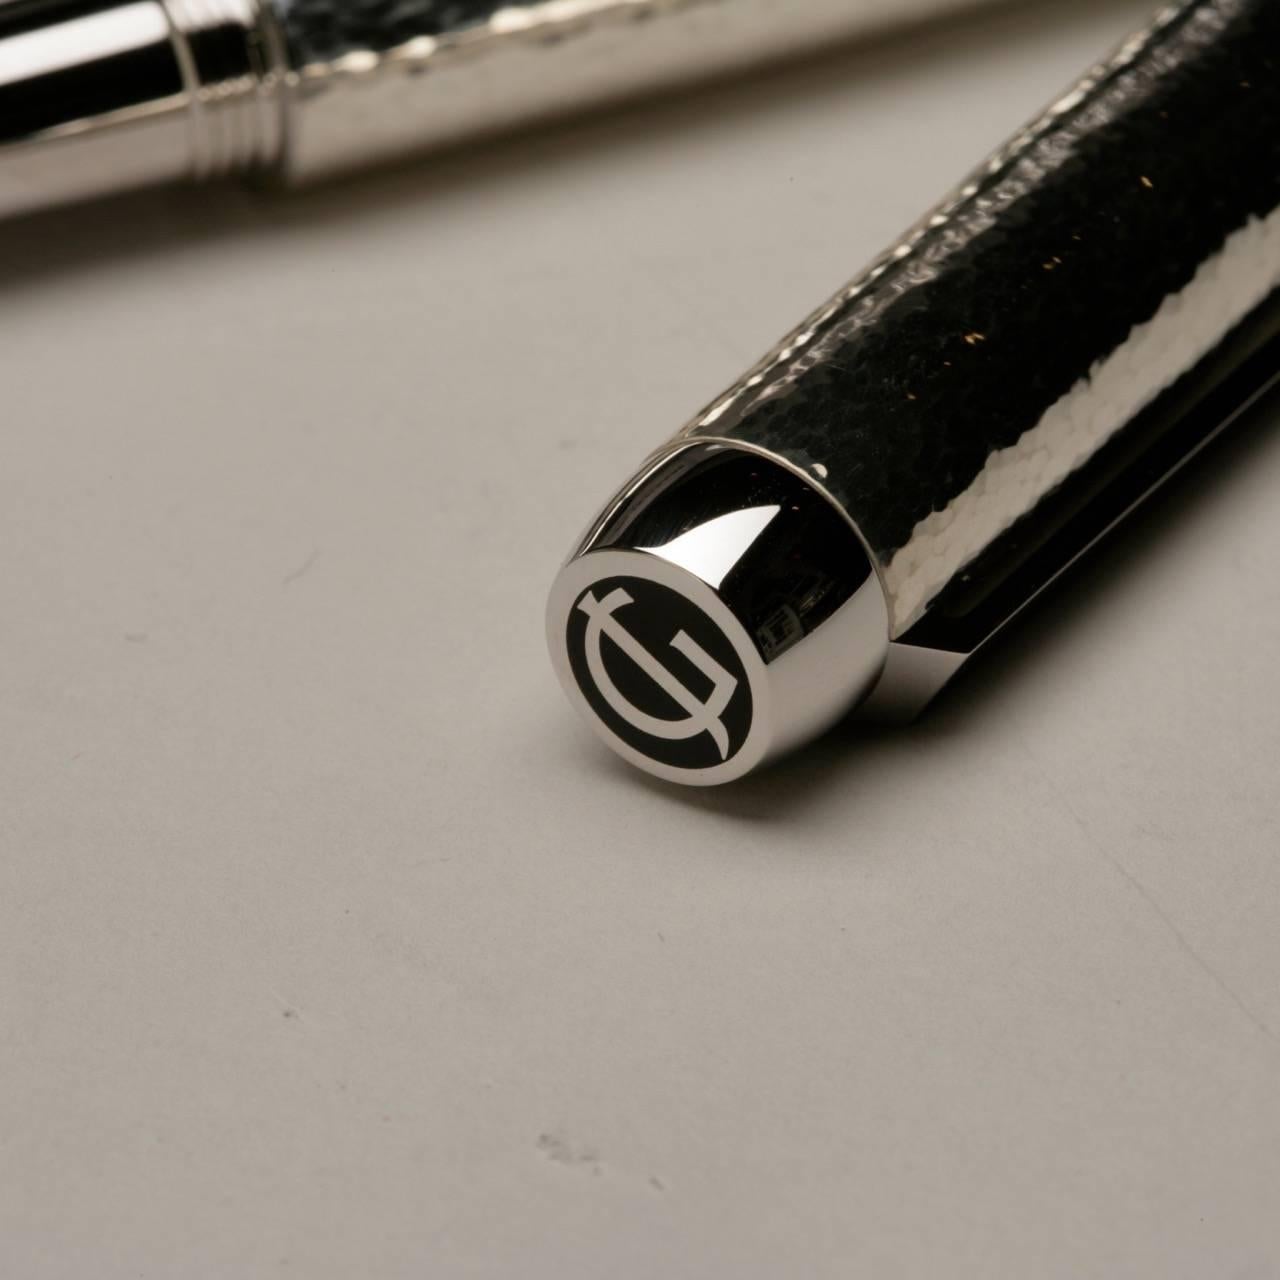 Georg Jensen sterling silver pen

Stylish and chic hammered sterling silver pen with steel nib (made in Germany.) End of screw top with GJ cypher.

Comes with gift box, extra ink cartridges, touch up cloth and registration certificate.

      